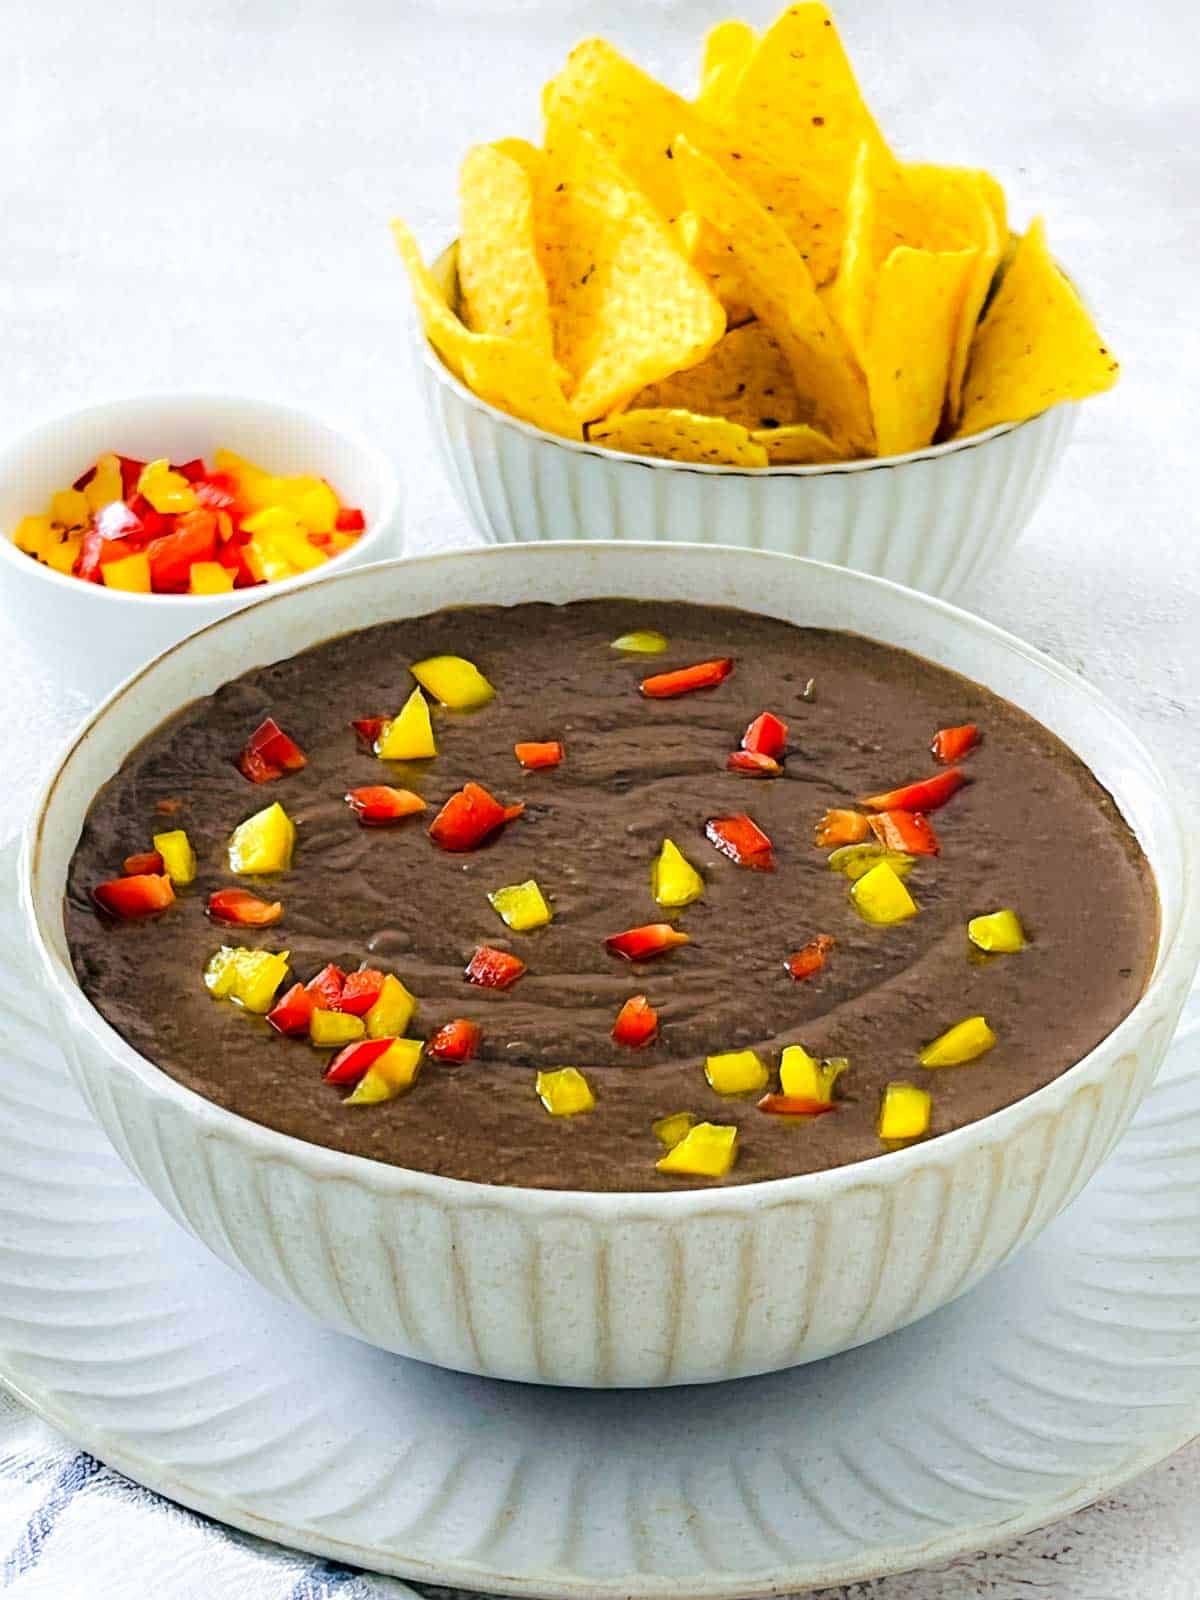 Refried beans in a white bowl with tortilla chips in the background.